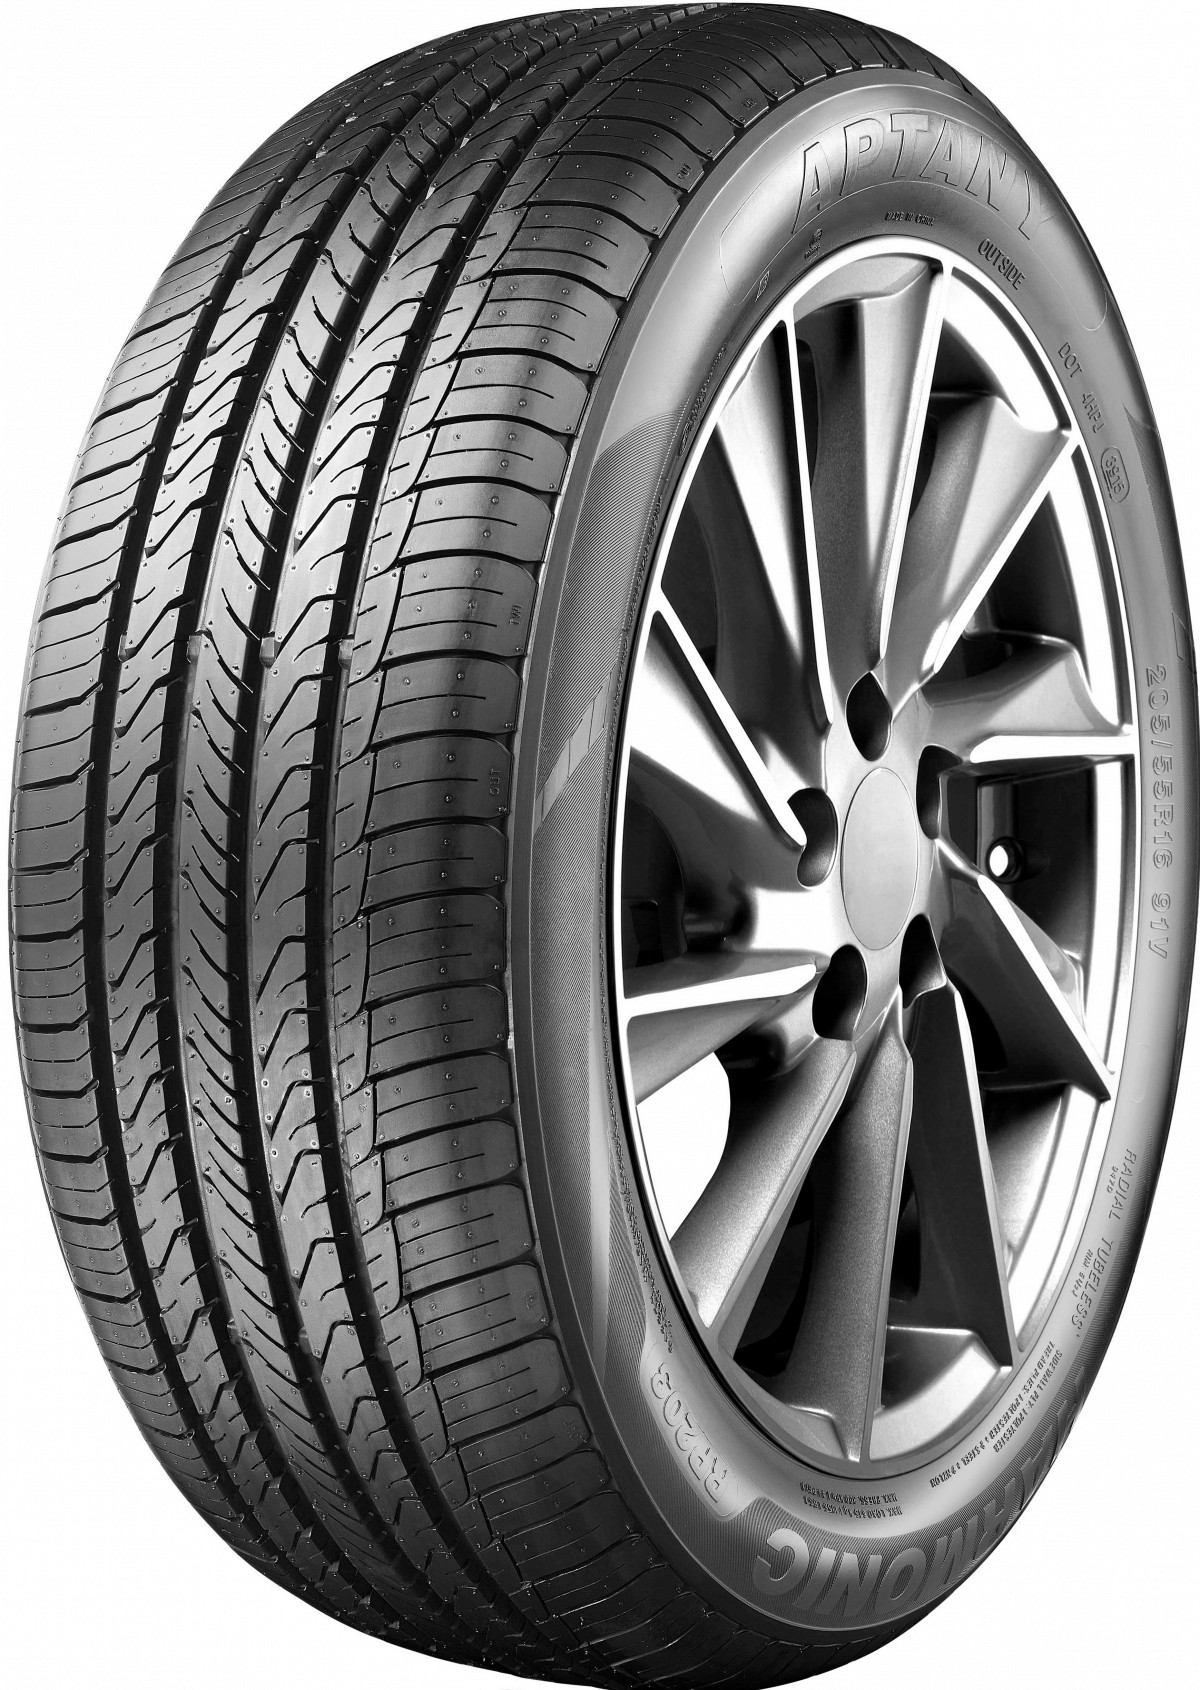 Gomme per autovetture SEAT 155 70 R13 Aptany RP203 2003